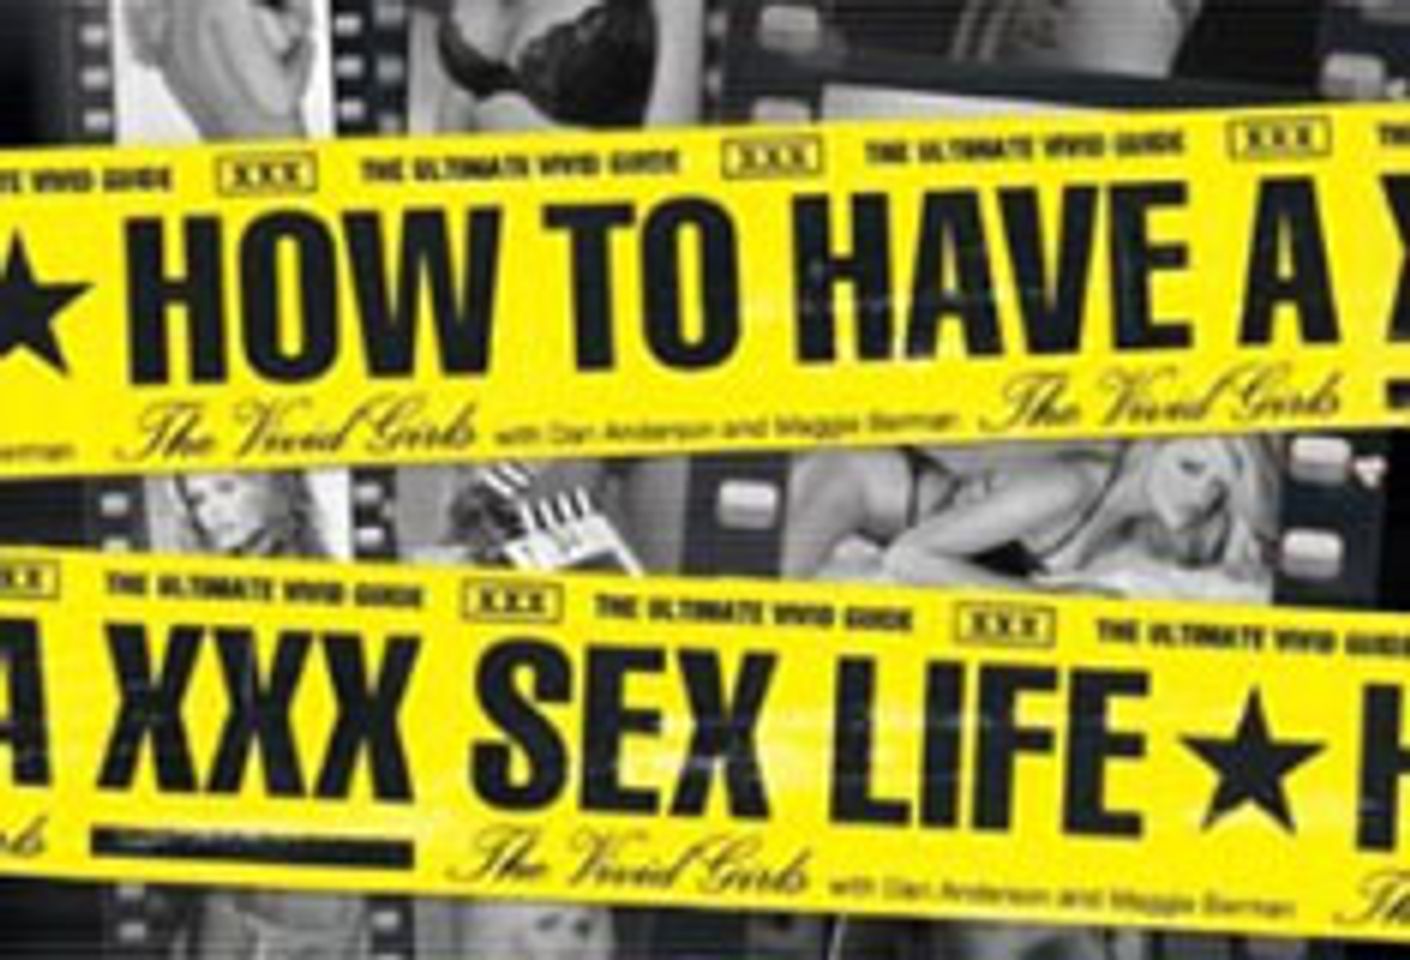 Vivid Girls Dish Sex Tips and Anecdotes in New Book